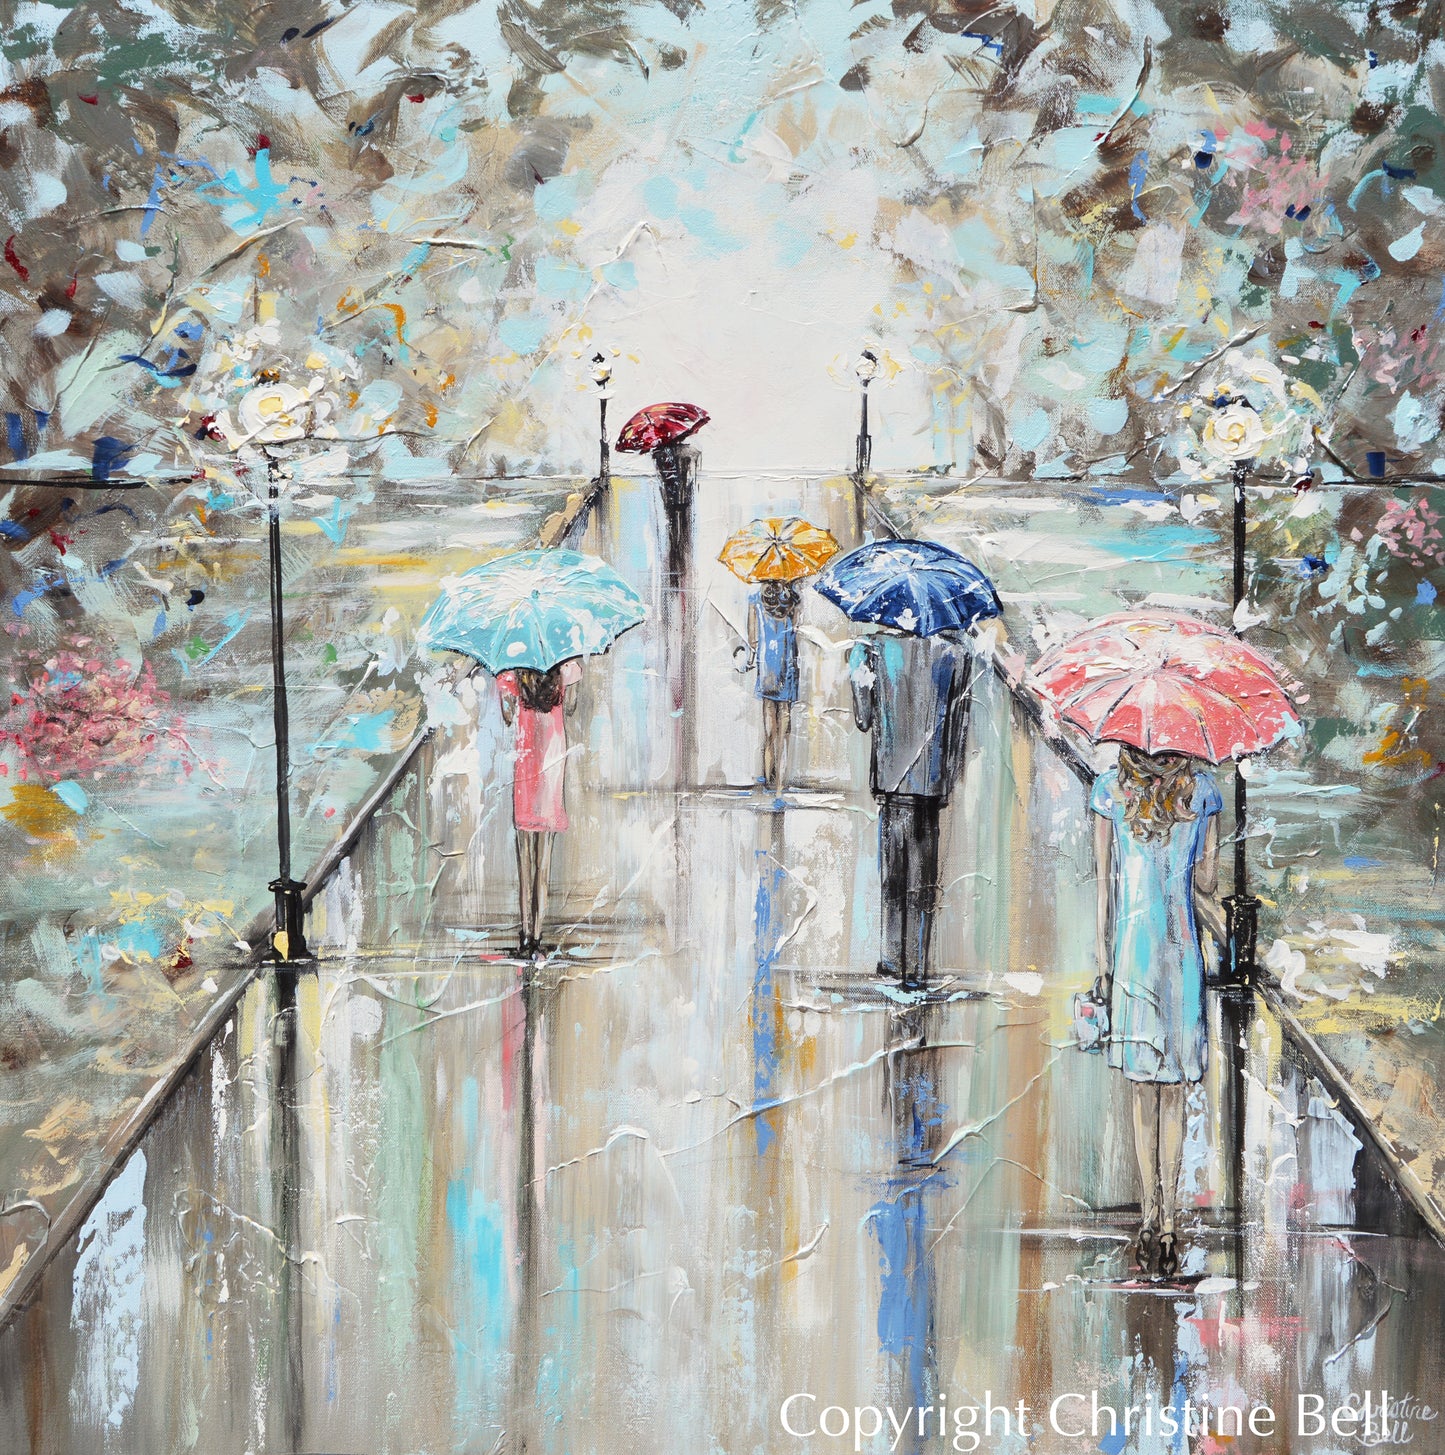 "Central Park" ORIGINAL Art Abstract Painting Landscape Girl w Umbrella Trees Textured 36x36"